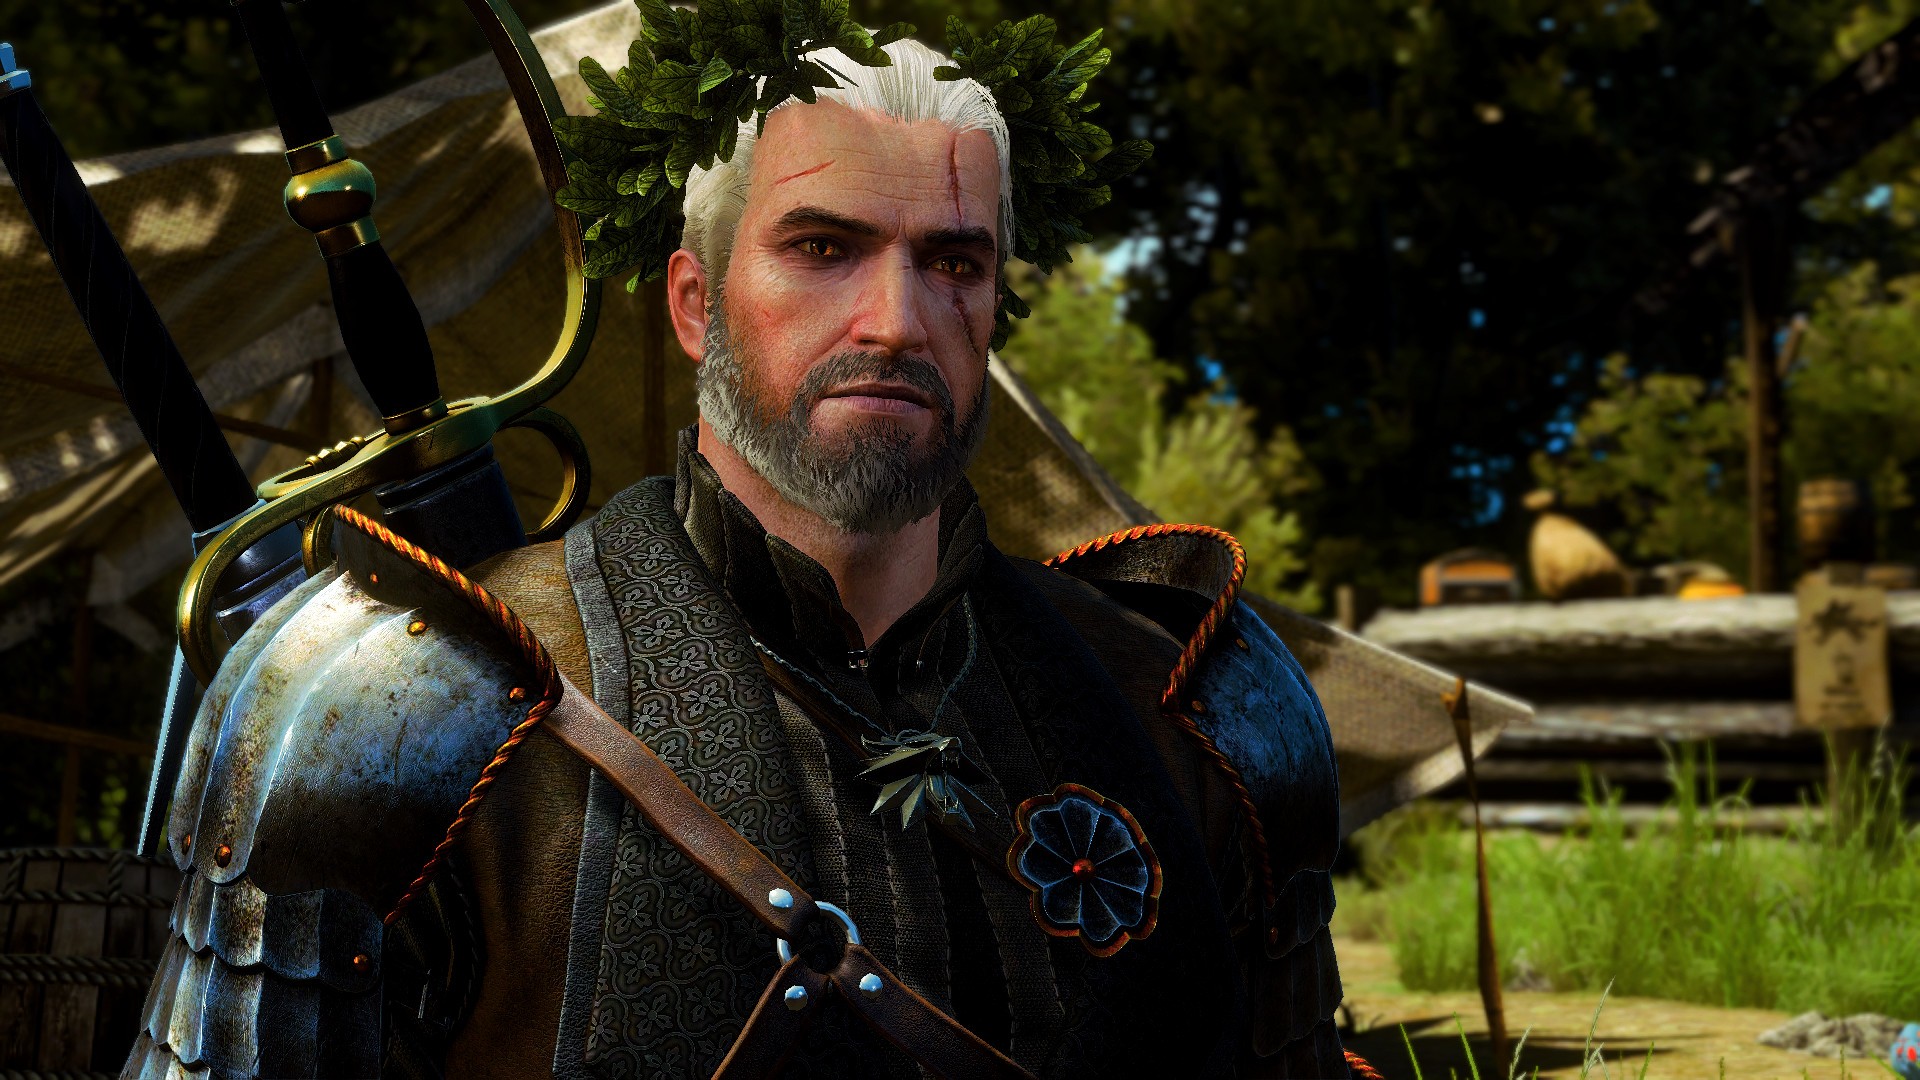 General 1920x1080 The Witcher 3: Wild Hunt Geralt of Rivia armor video games screen shot The Witcher CD Projekt RED The Witcher 3: Wild Hunt - Blood and Wine RPG PC gaming video game men video game characters fantasy men